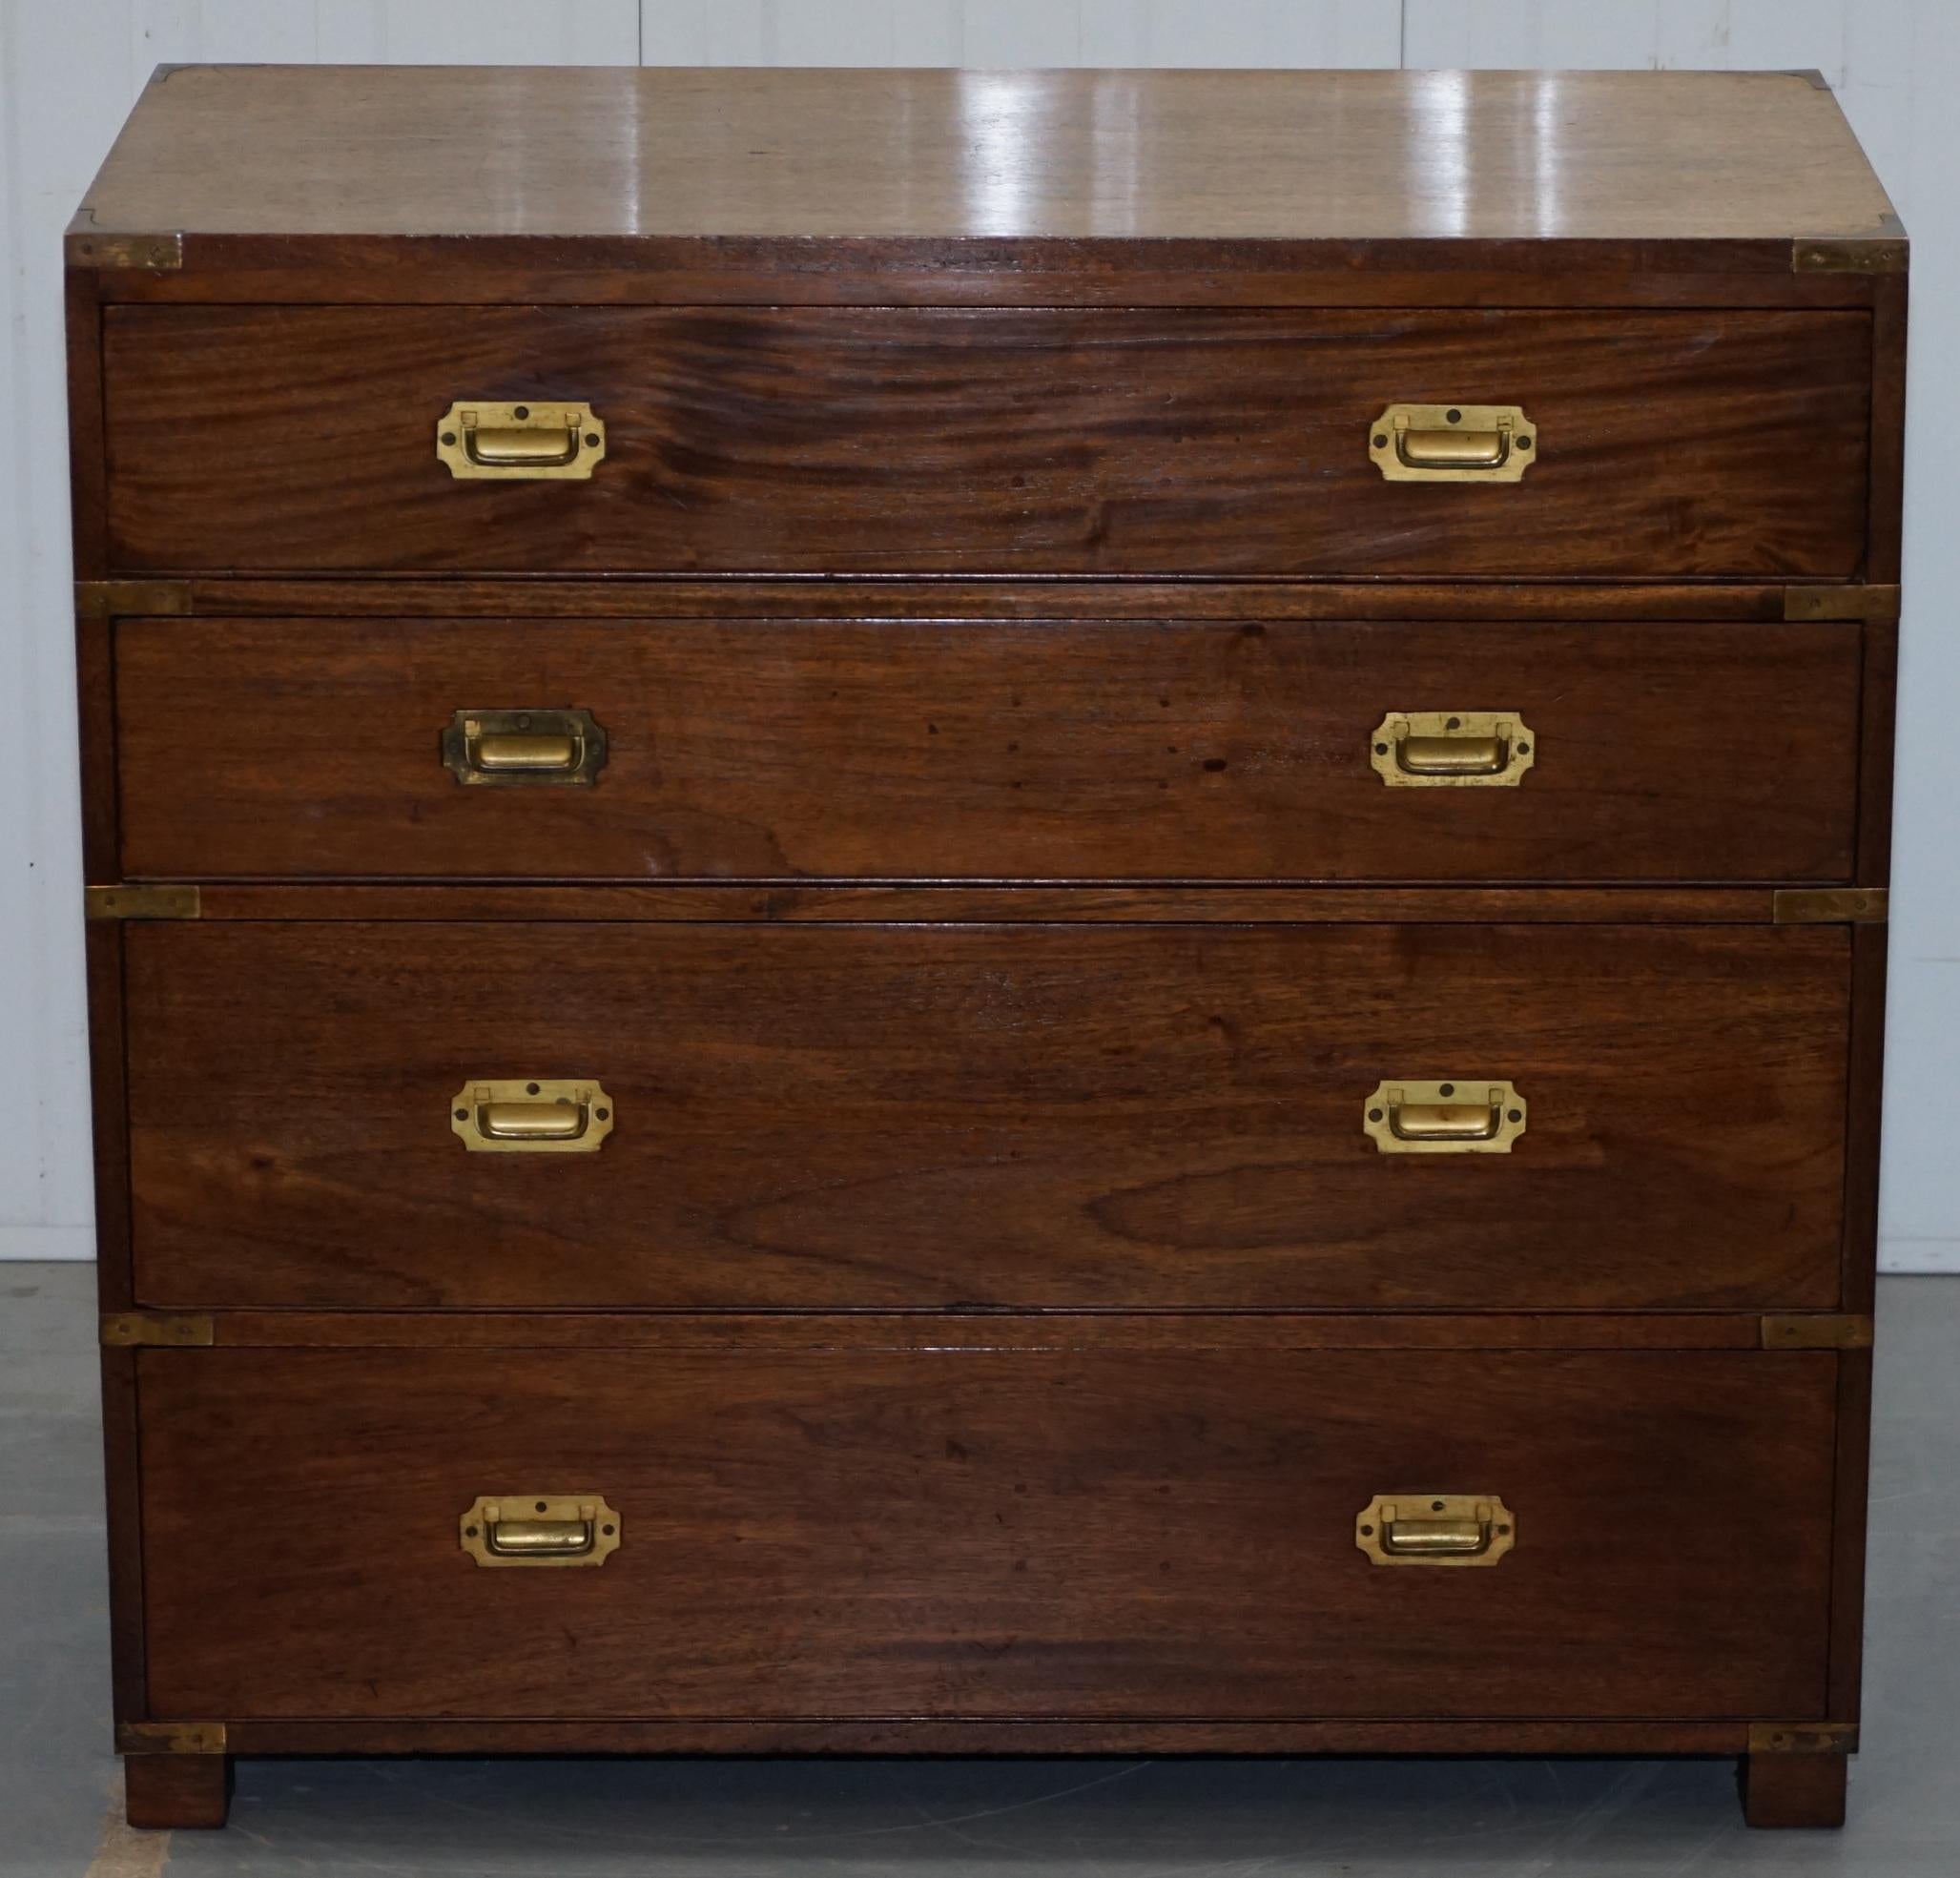 We are delighted to offer for sale this very rare S&H Jewell stamped Victorian Mahogany & Brass Military Campaign chest of drawers

A very good looking well made and function chest of drawers by one of the great English Furniture makers of the